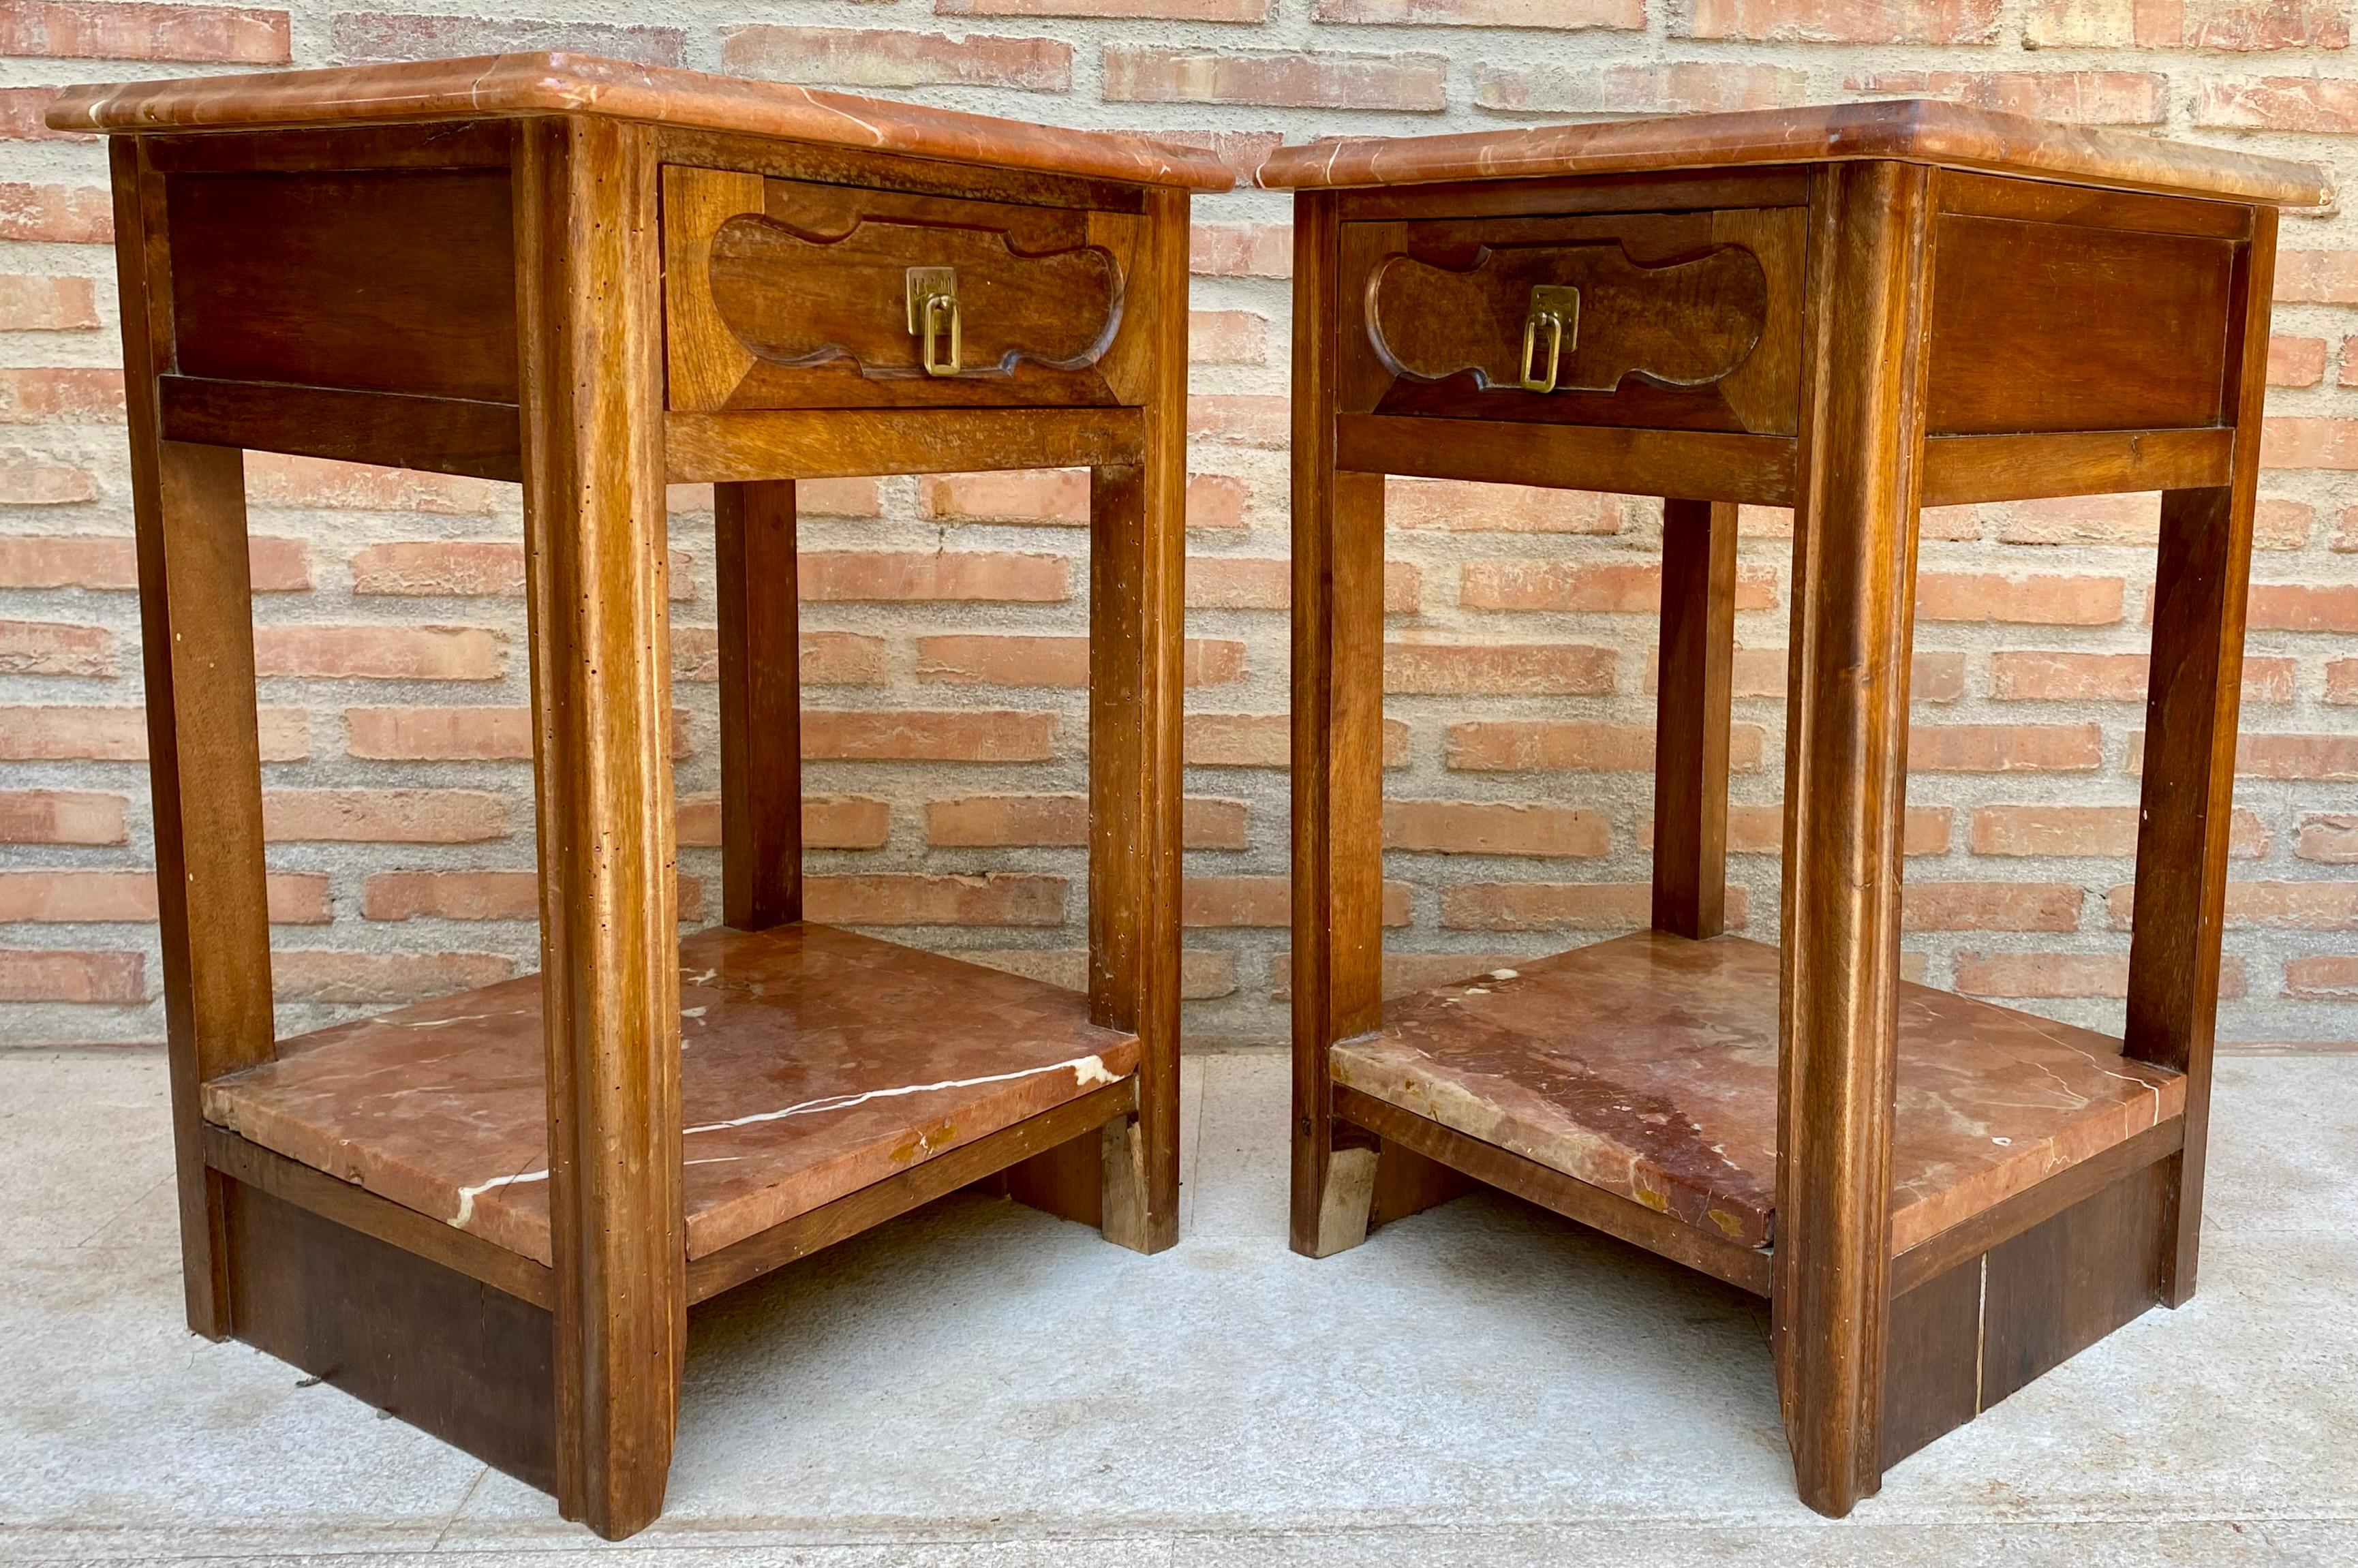 Beautiful pair of bedside tables from the 40s in art deco style. They have a low shelf of reddish marble, and their top supported by four straight columns also have a marble base of the same color.
They also have a small carved front drawer with